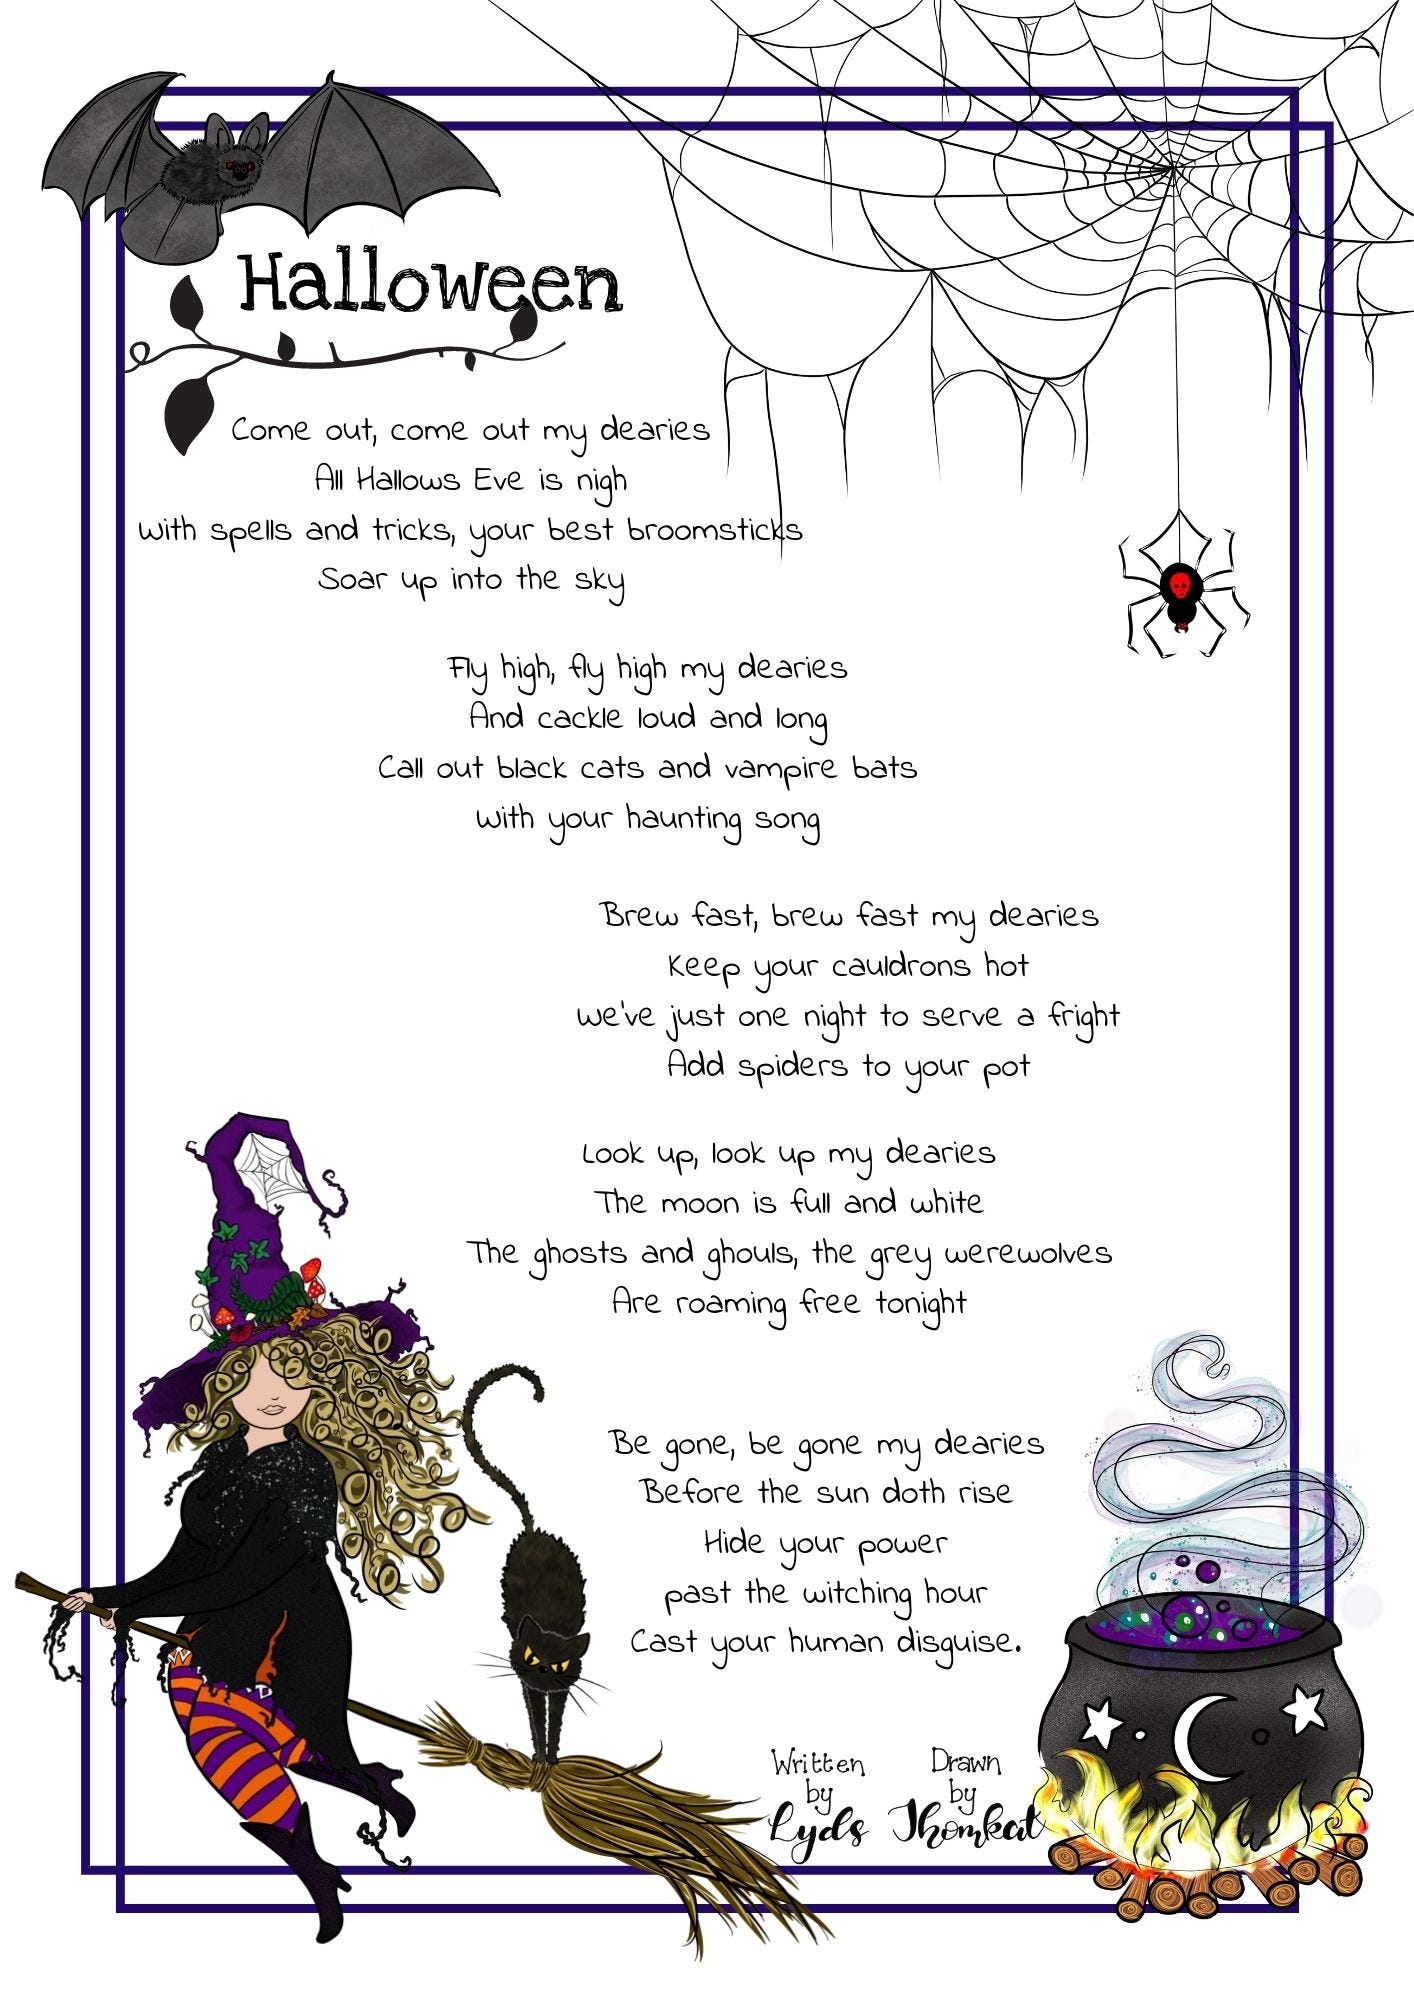 Halloween poem illustrated with a black bat, a scruffy spiderweb and spider, a curvaceous witch on a broomstick with her cat, and a bubbling cauldron. The poem reads; Come out, come out my dearies, All Hallows Eve is nigh, With spells and tricks, your best broomsticks, Soar up into the sky. Fly high, fly high my dearies, And cackle loud and long, Call out black cats and vampire bats, With your haunting song. Brew fast brew fast my dearies, keep your cauldrons hot. We've just one night to serve a fright, add spiders to your pot. Look up, look up my dearies, the moon is full and white, the ghosts and ghouls, the grey werewolves are roaming free tonight. Be gone be gone my dearies, before the sun doth rise. Hide your power past the witching hour, cast your human disguise.